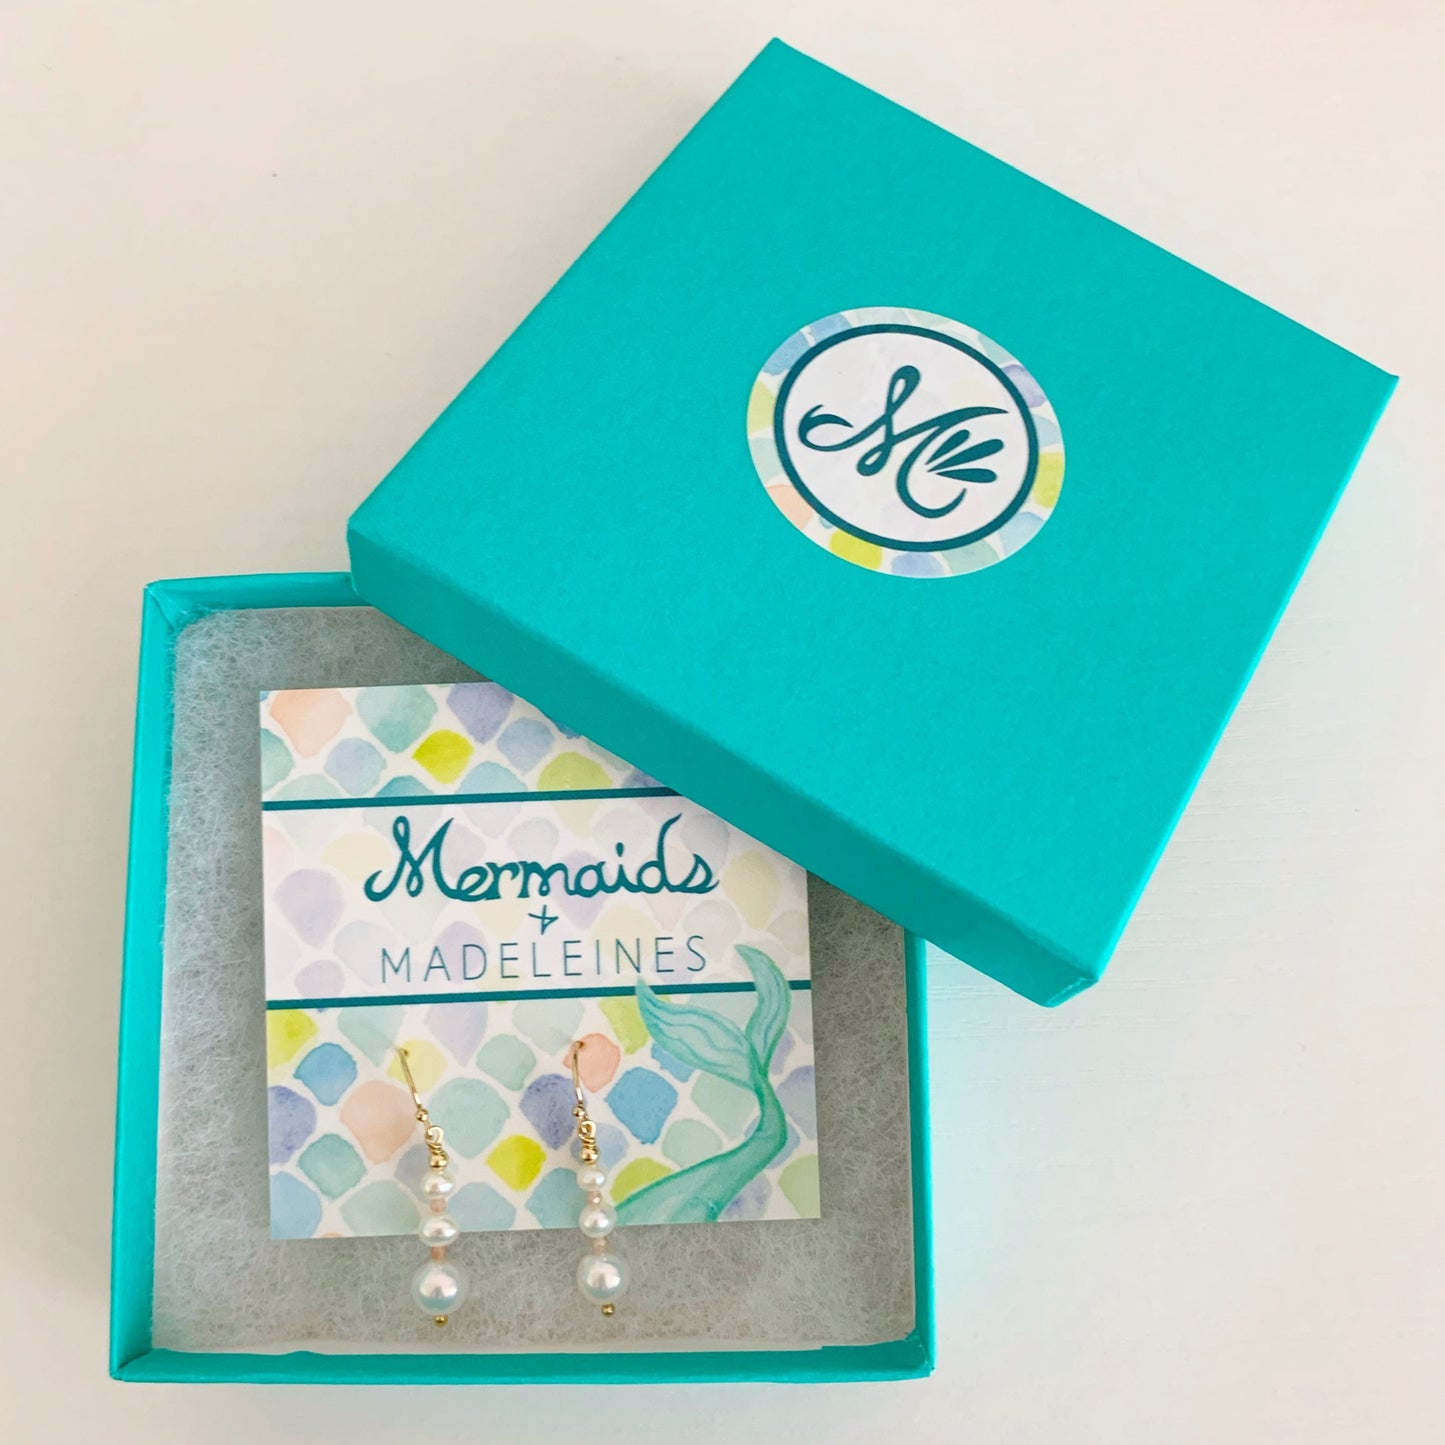 barrington earrings by mermaids and madeleines feature freshwater pearls in a linear taper, with peach moonstone accents and 14k gold filled findings. This pair of earrings is carded and placed in a cotton lined teal gift box on a white surface